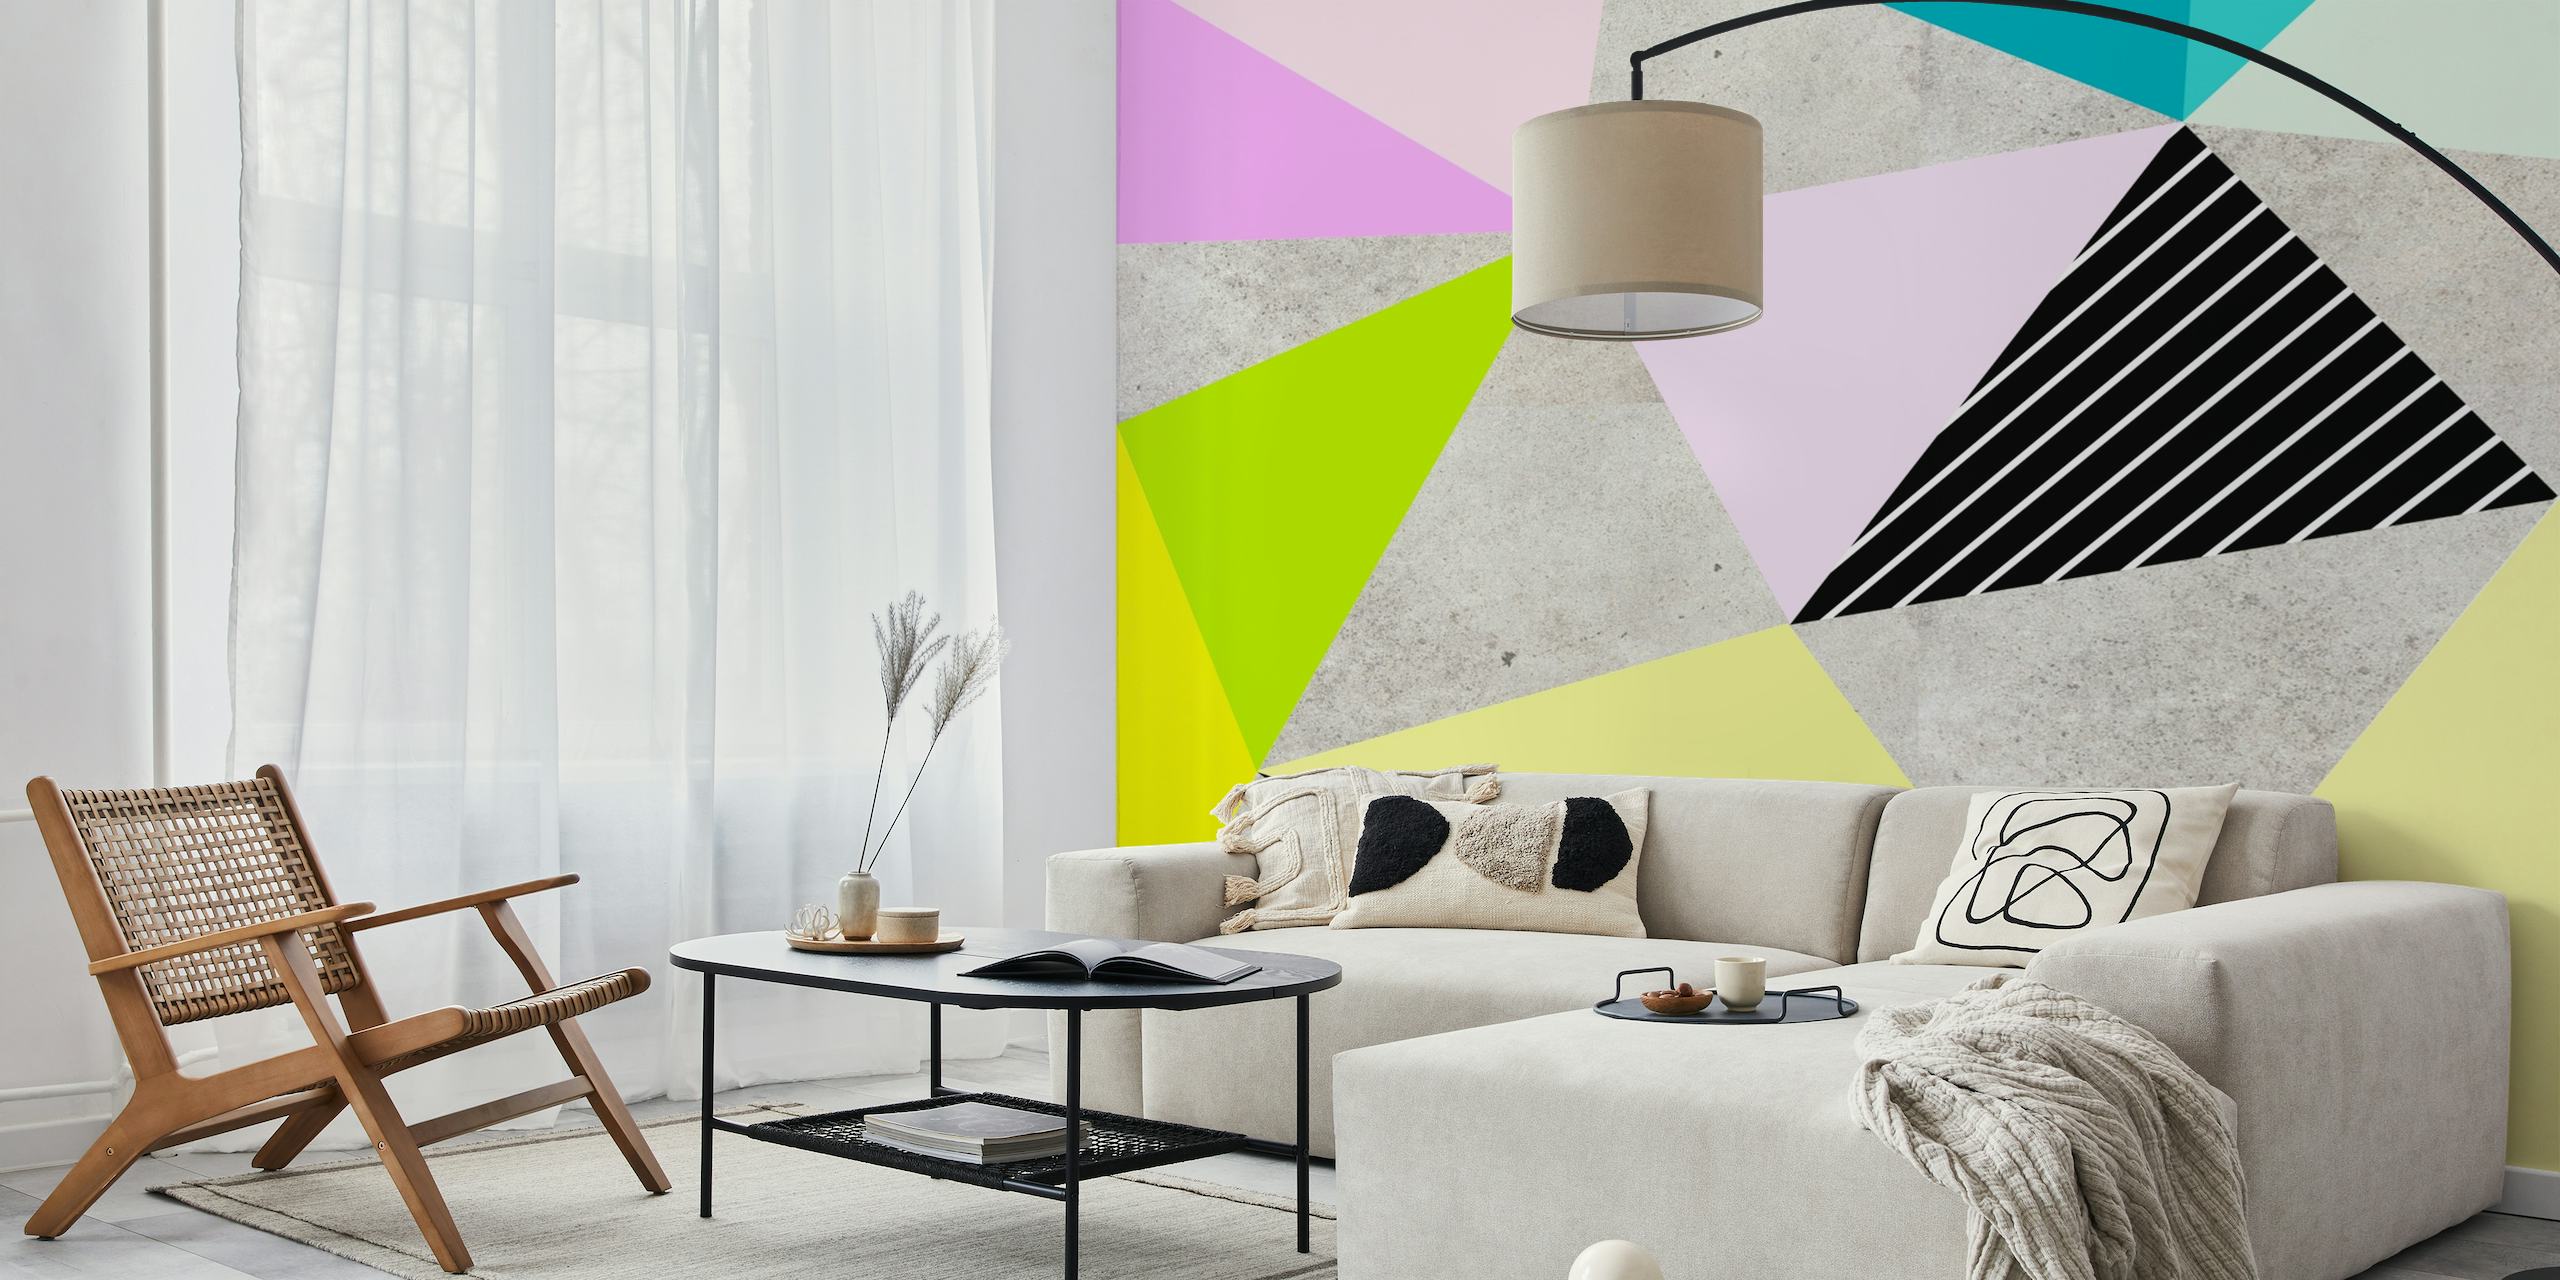 Colorful geometric shapes wallpaper with pastel tones and dotted patterns